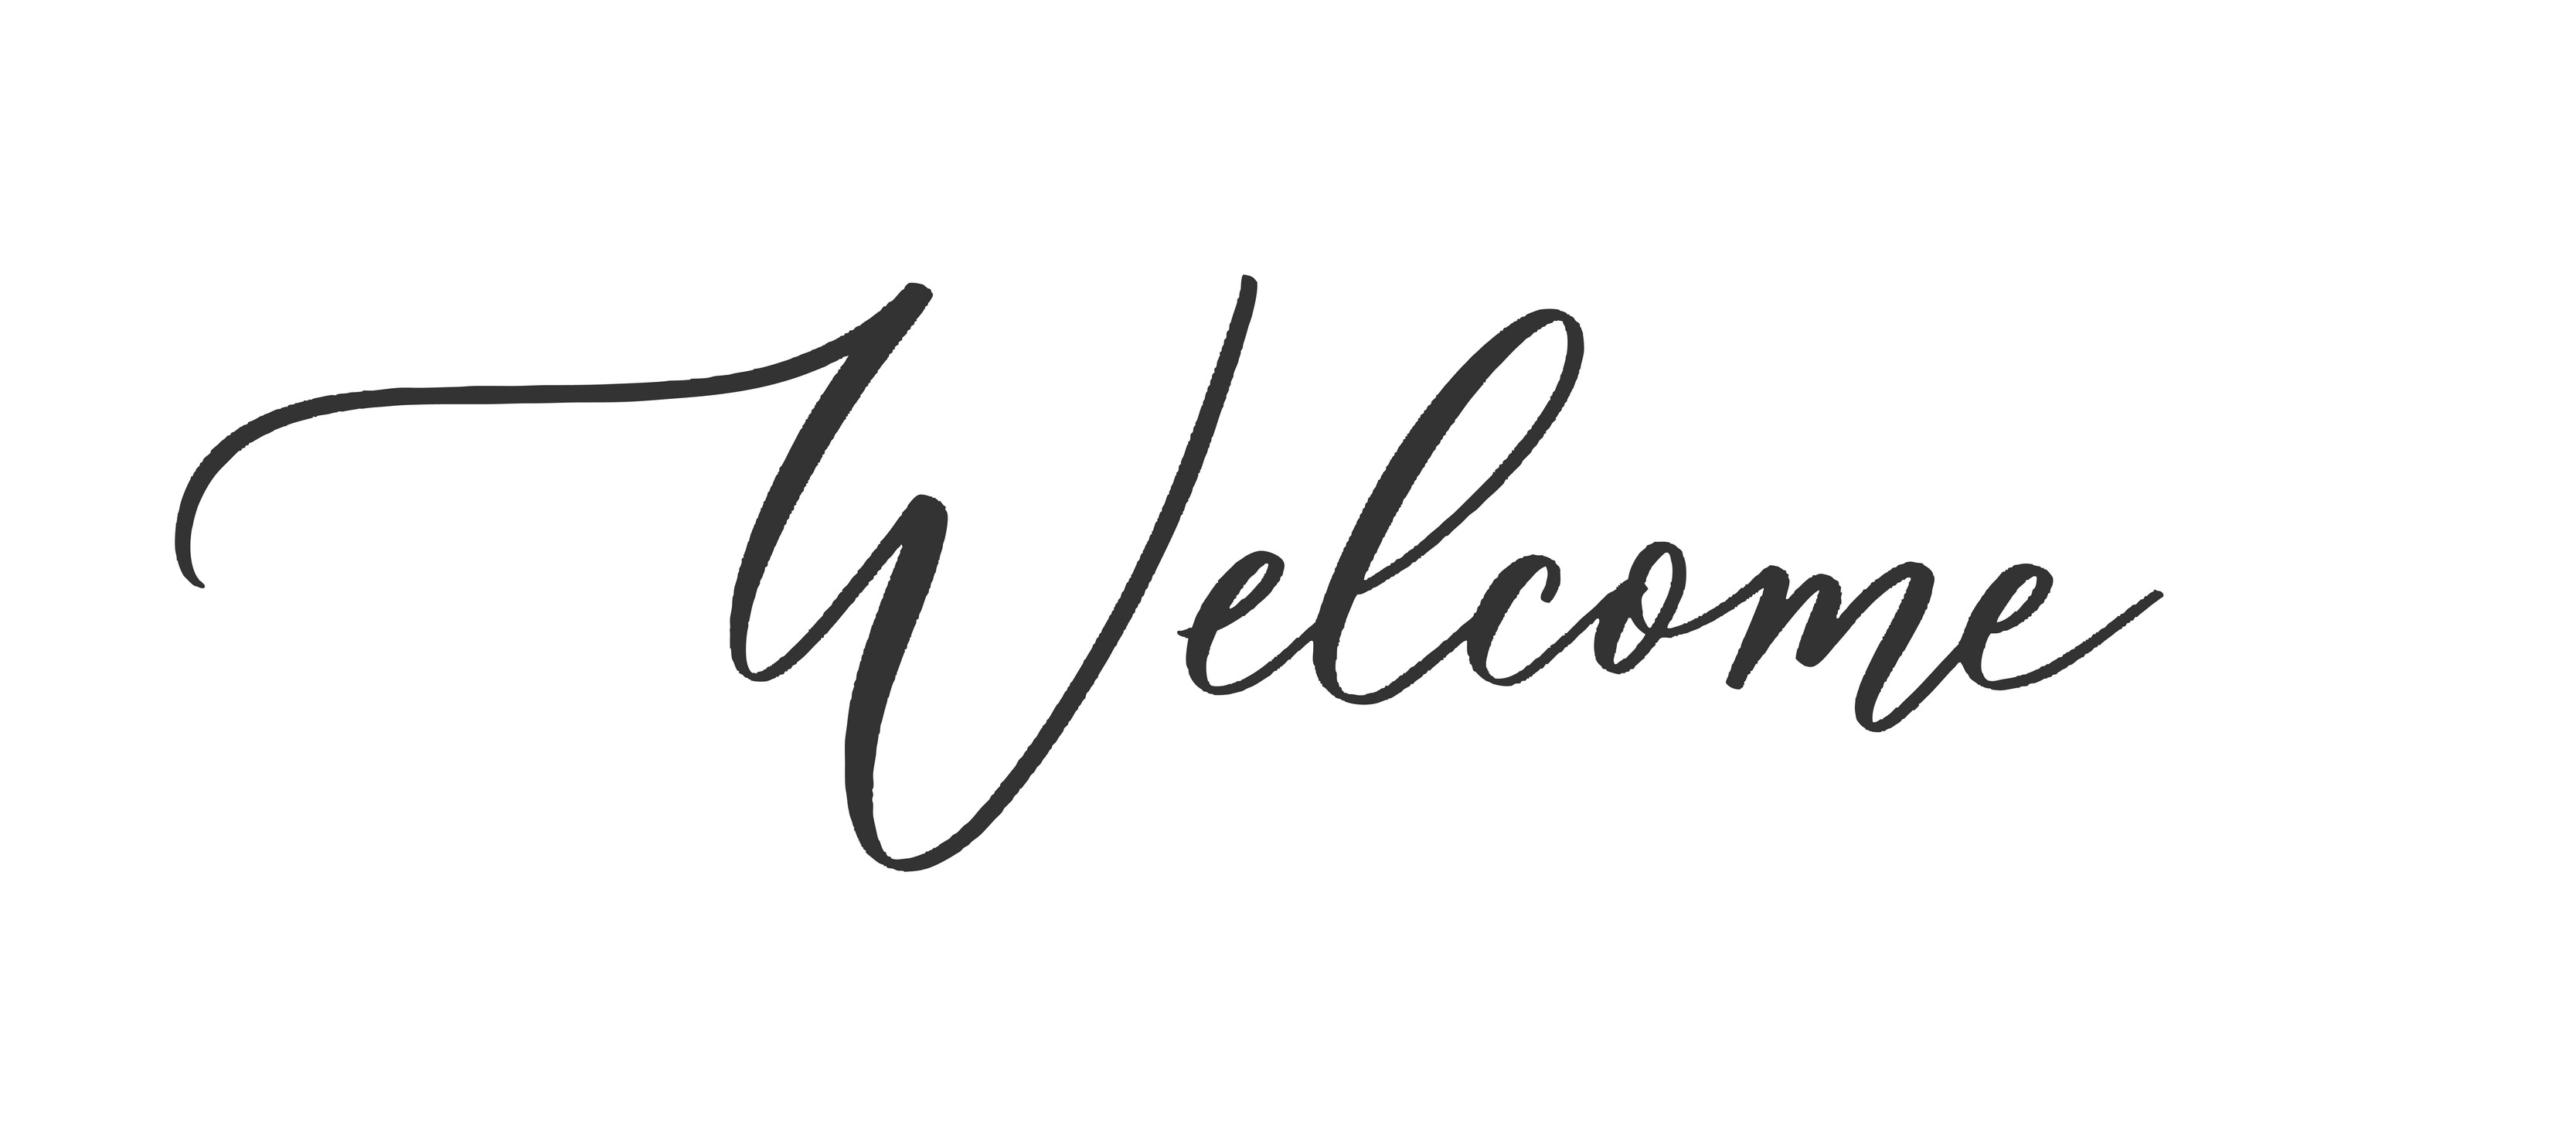 Welcome - calligraphic inscription with smooth lines. 5025931 Vector ...